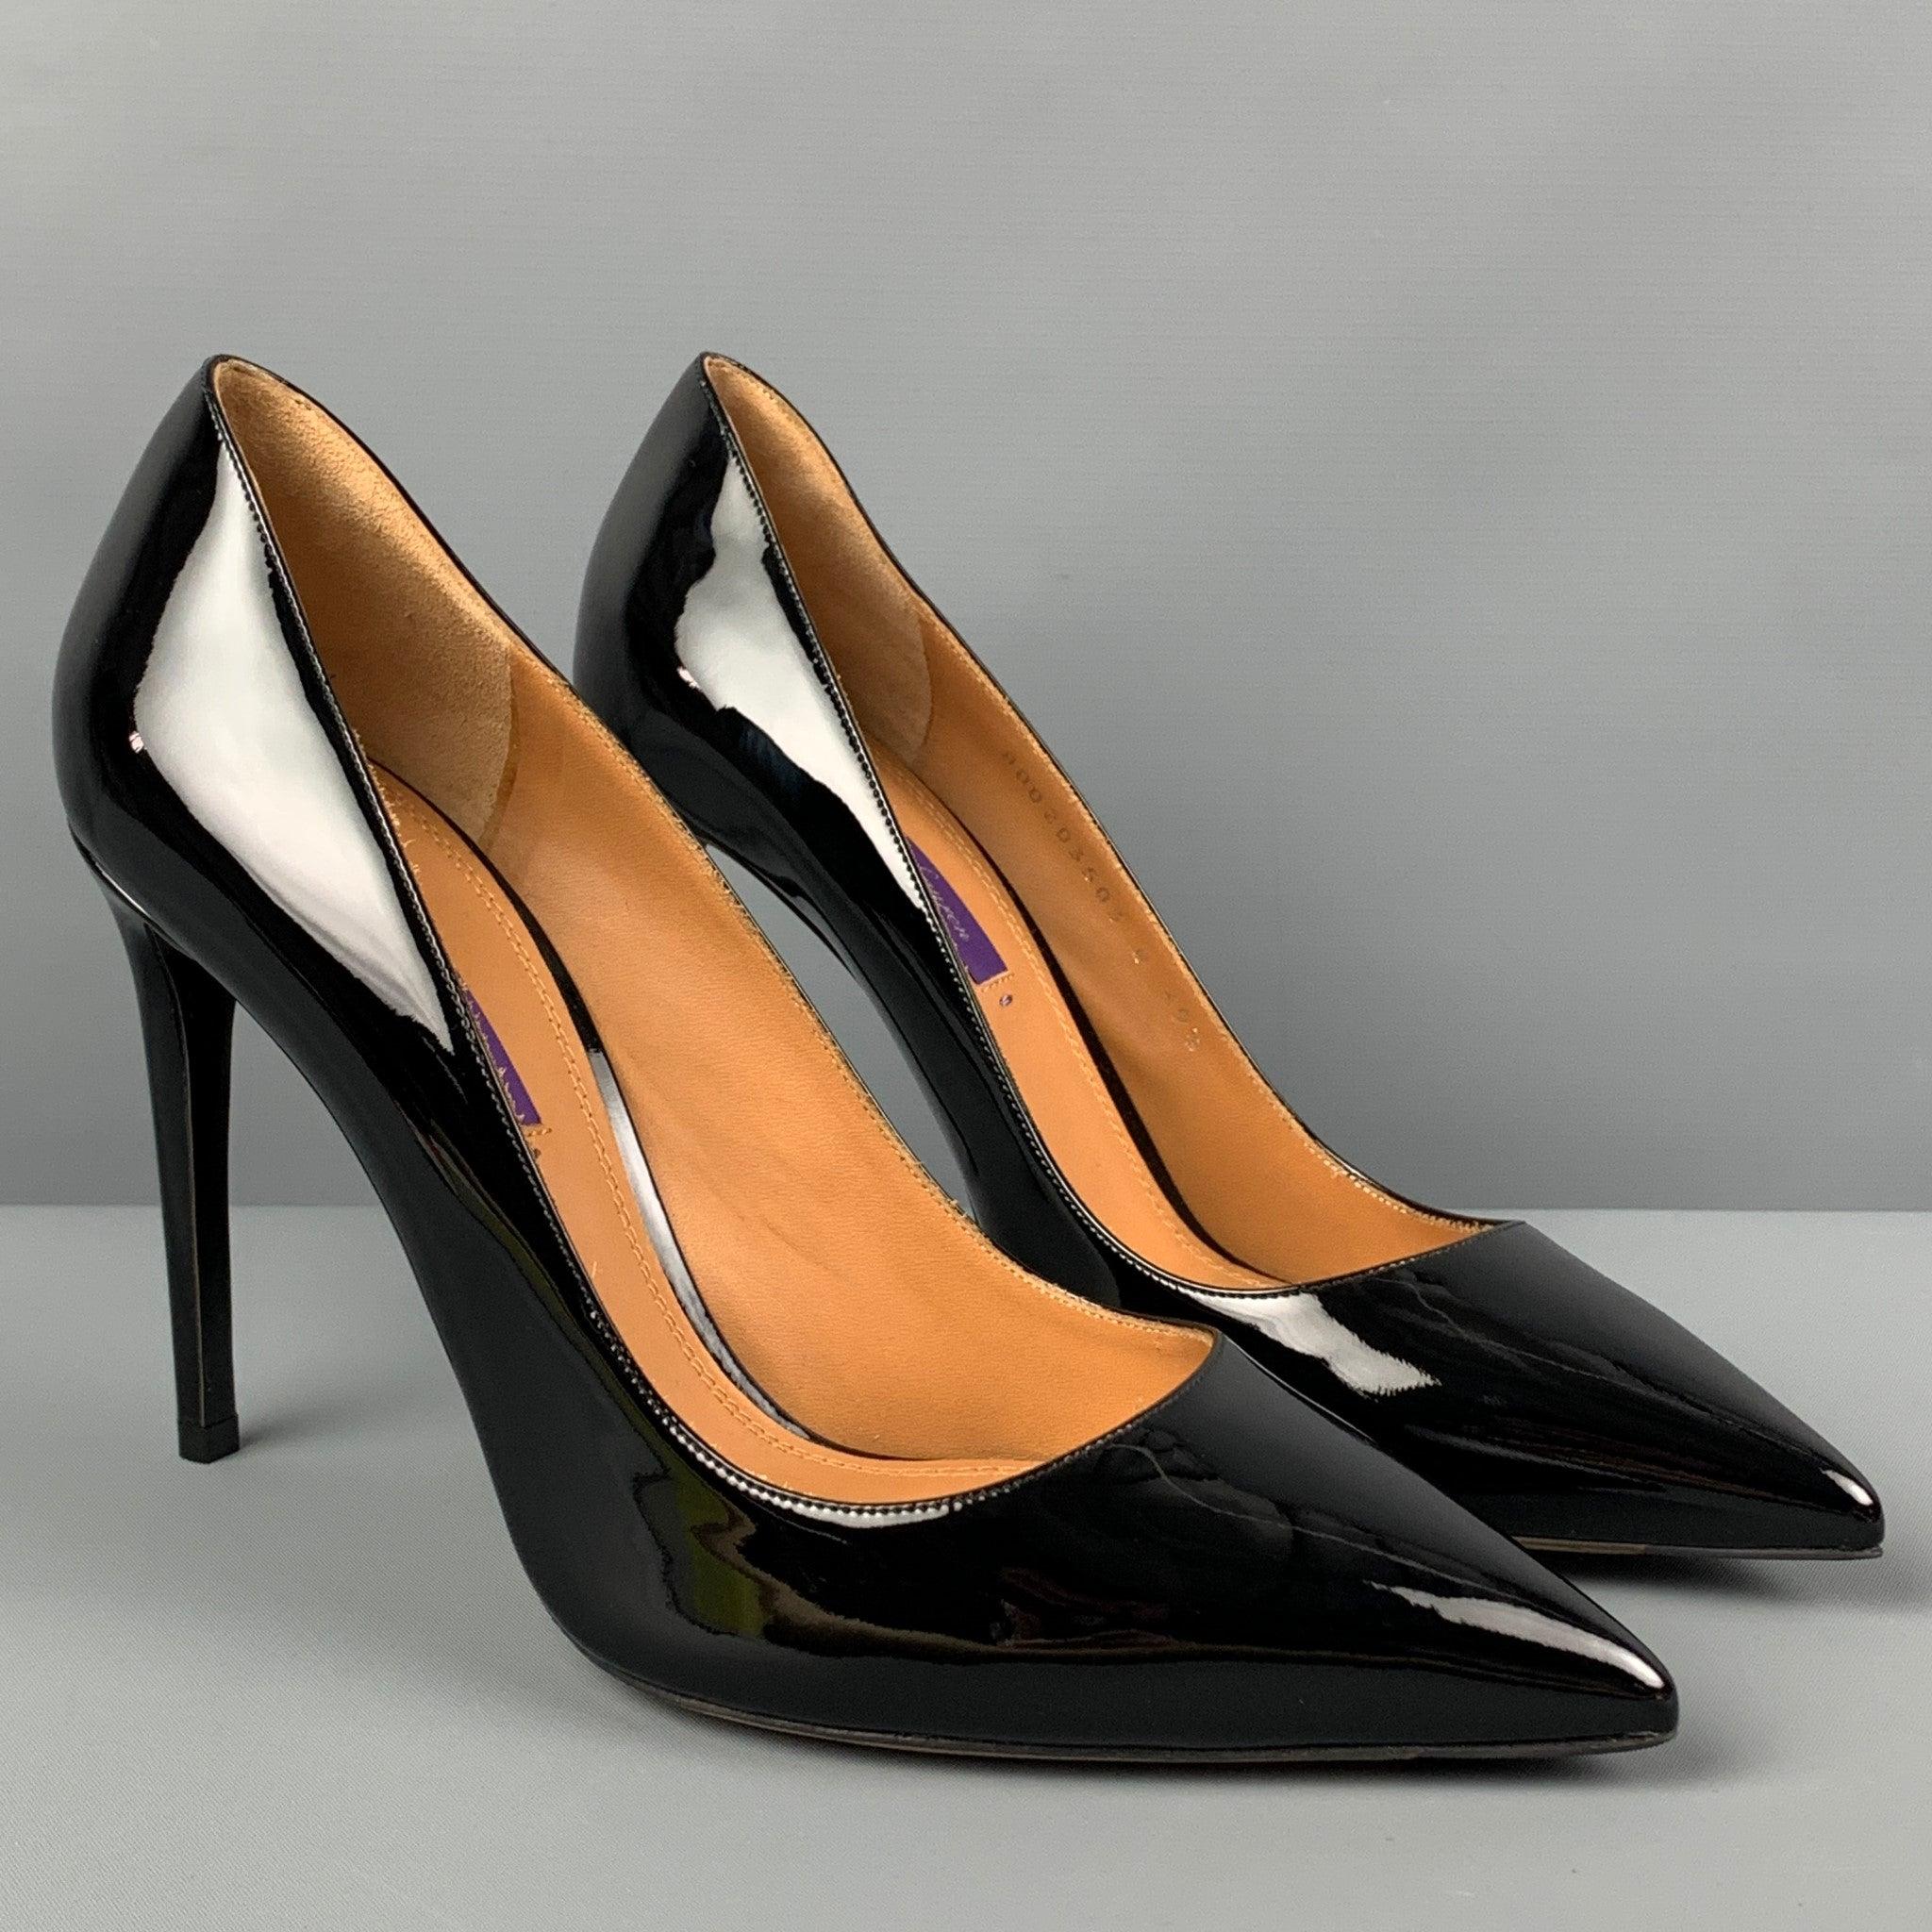 RALPH LAUREN Collection 'Celia' pumps comes in a black patent leather featuring a pointed toe and a stiletto heel. Made in Italy.
New With Box.
 

Marked:   39.5 B 

Measurements: 
  Heel: 4.25 inches 
  
  
 
Reference: 120588
Category: Pumps
More